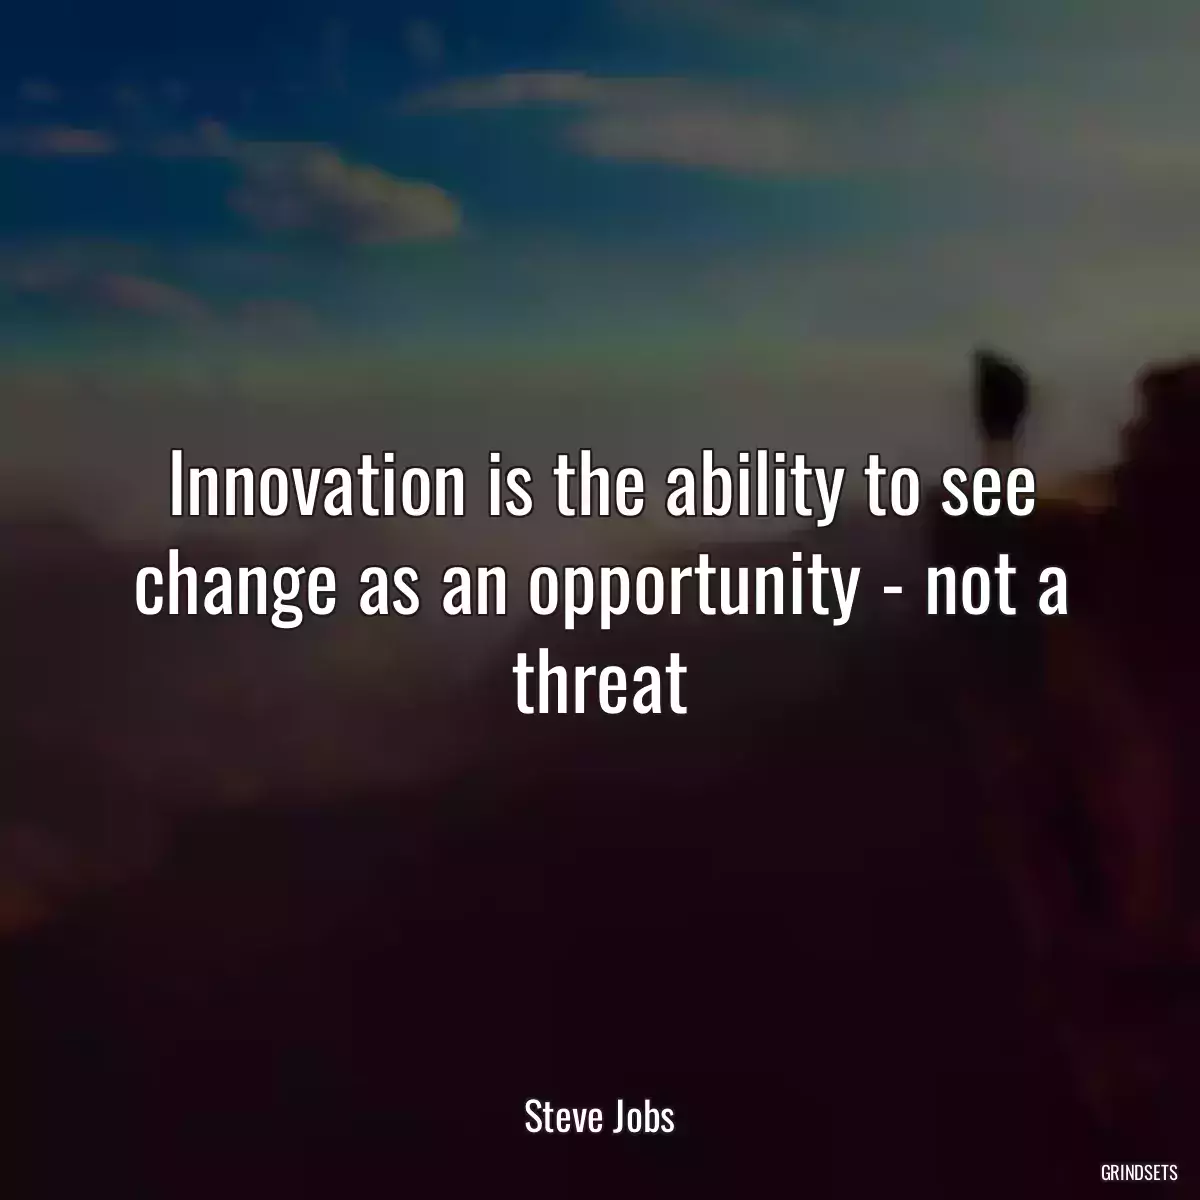 Innovation is the ability to see change as an opportunity - not a threat